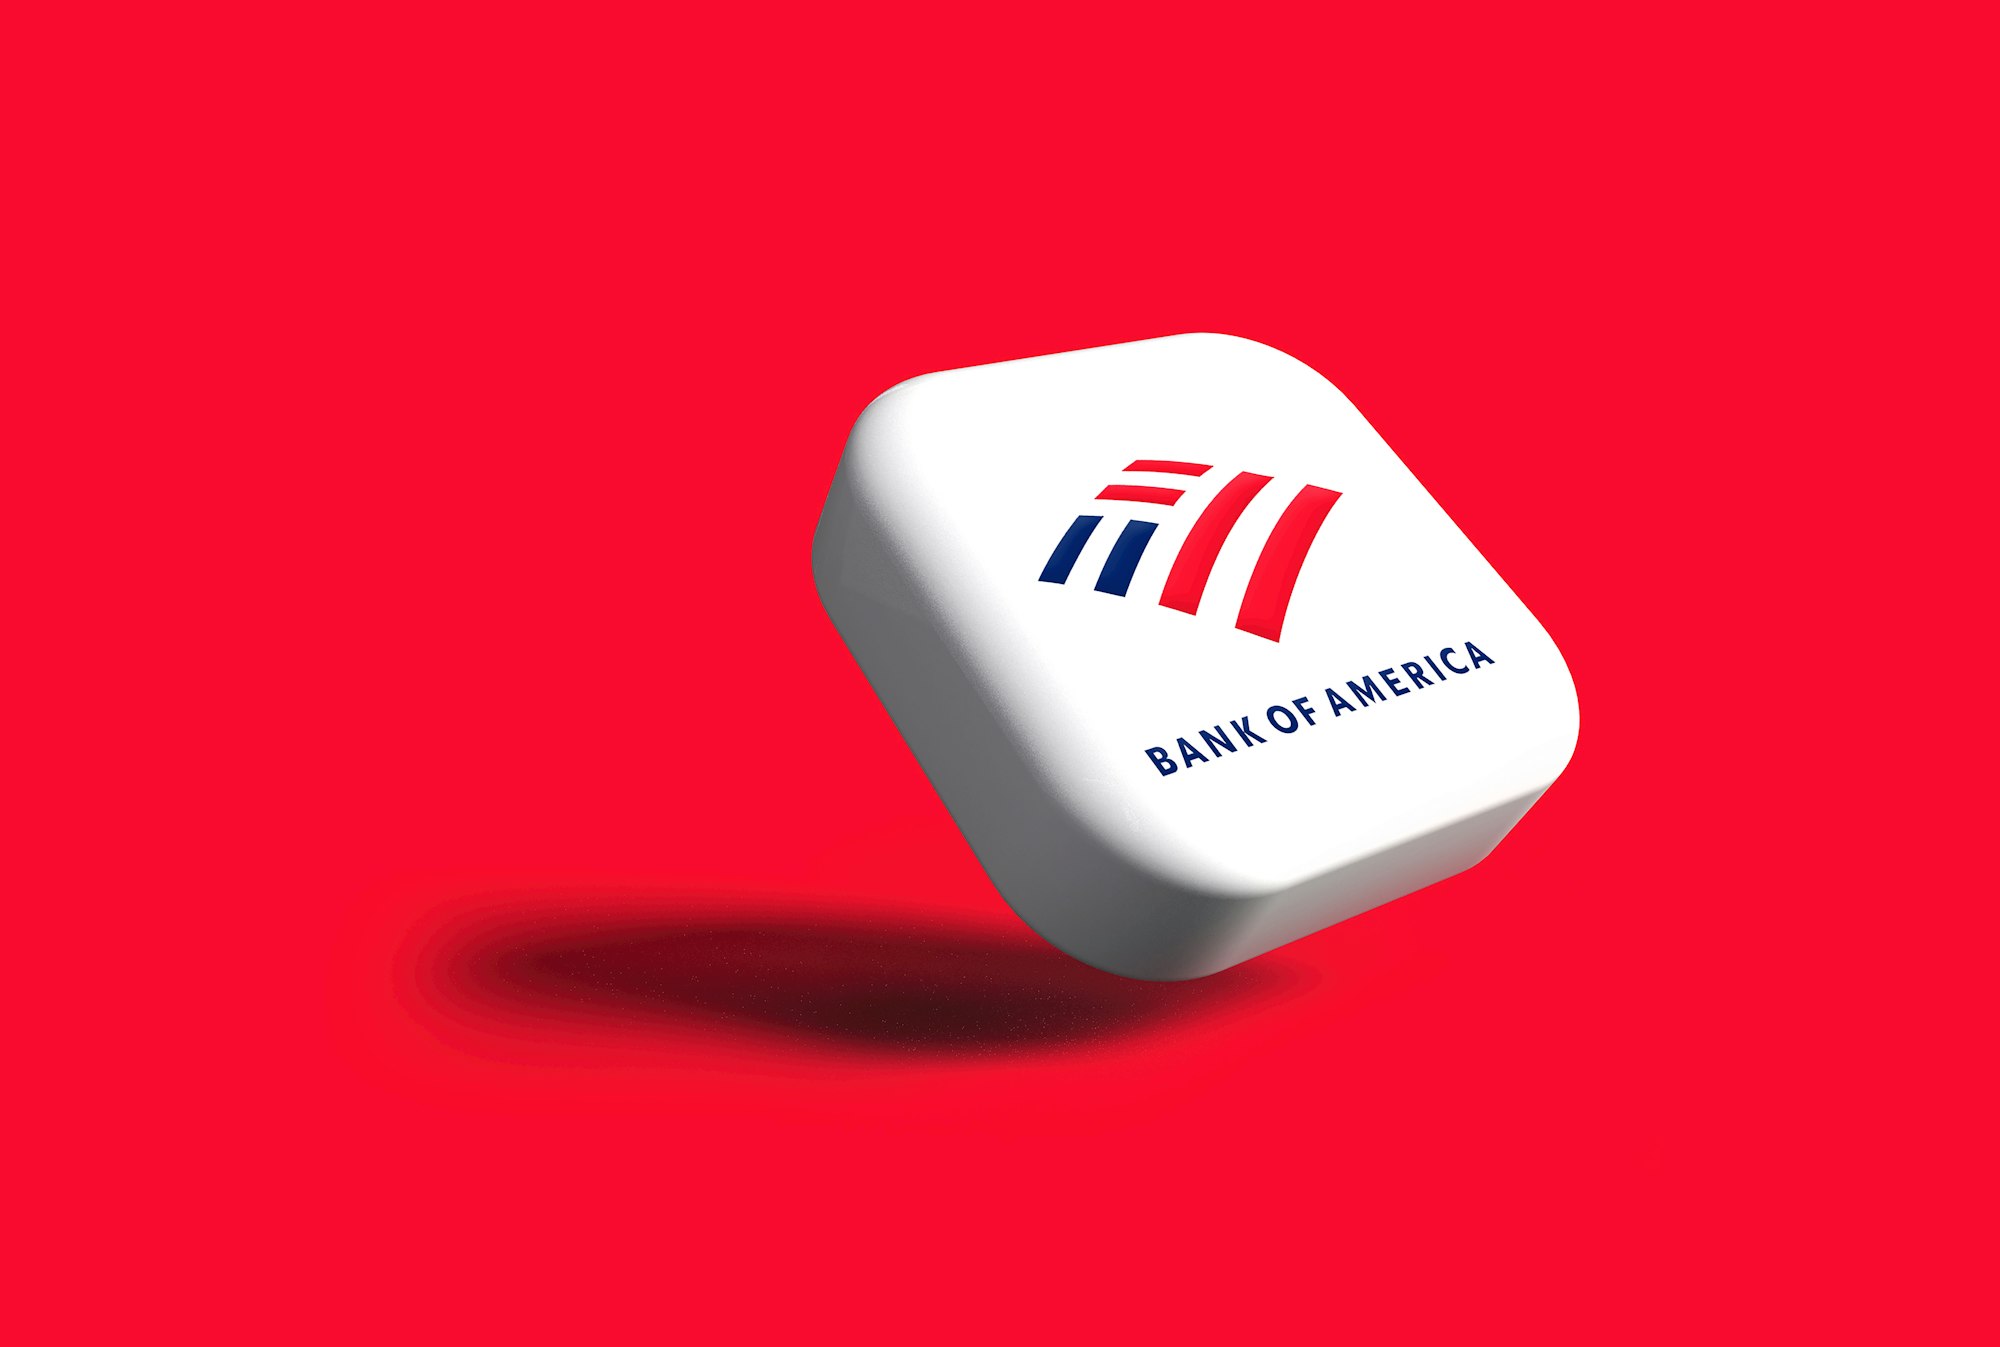 a bank of america logo on a white dice